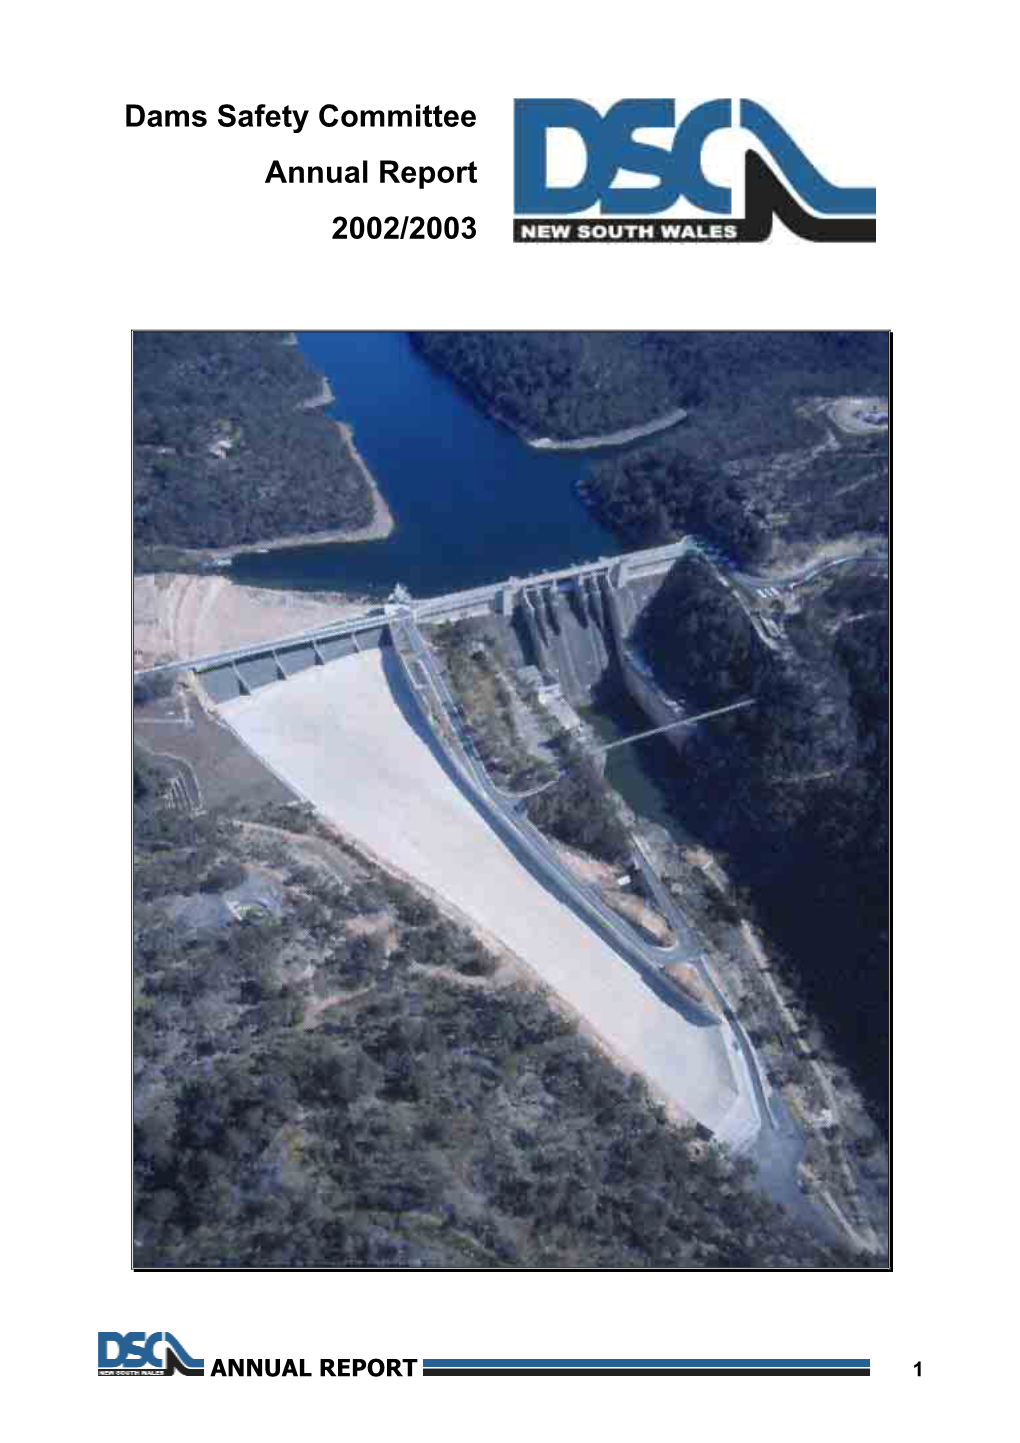 Dams Safety Committee Annual Report 2002/2003 Frontmatter